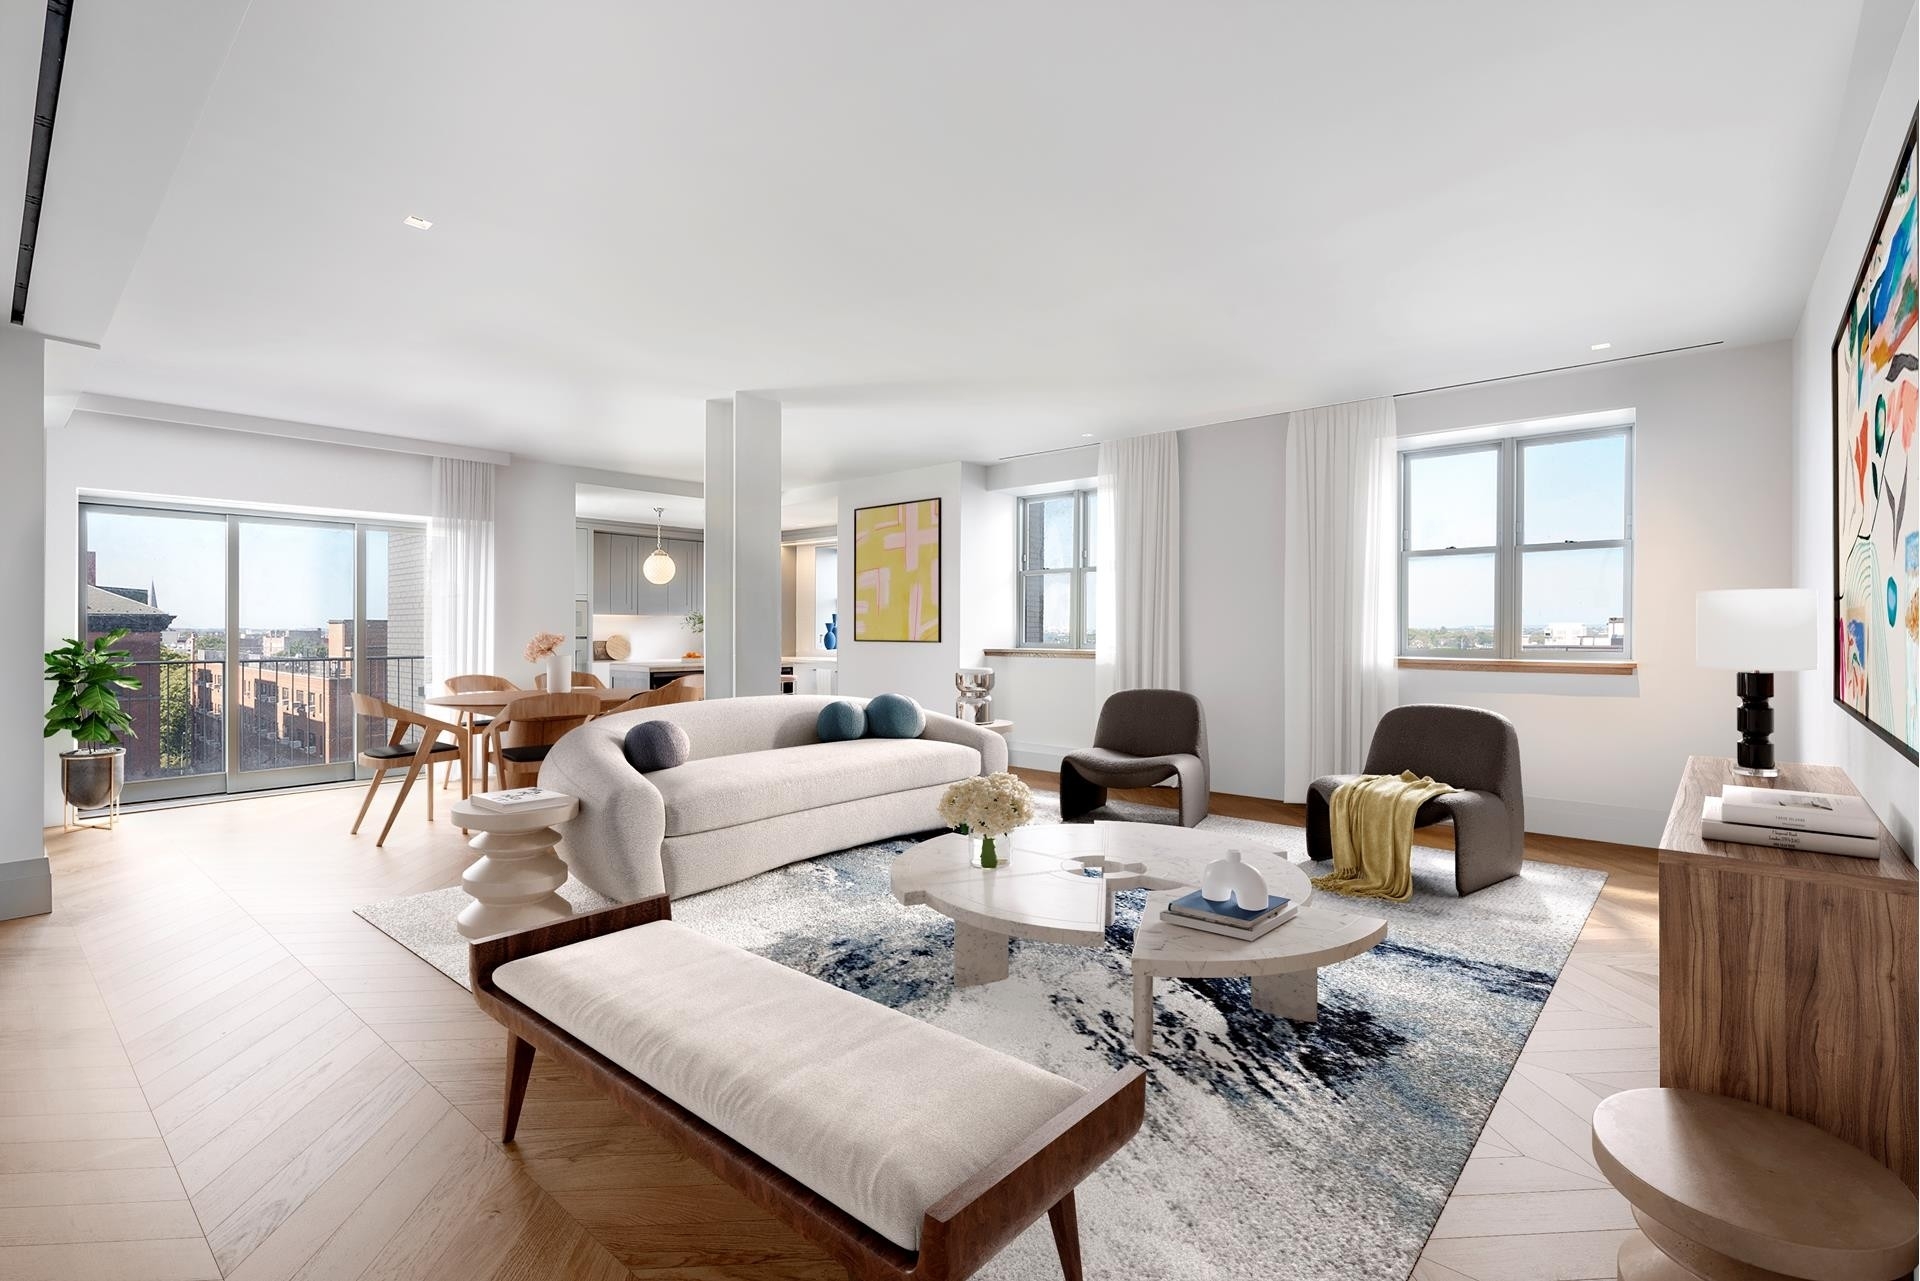 1. Condominiums for Sale at Polhemus, 100 AMITY ST, 5A Cobble Hill, Brooklyn, New York 11201